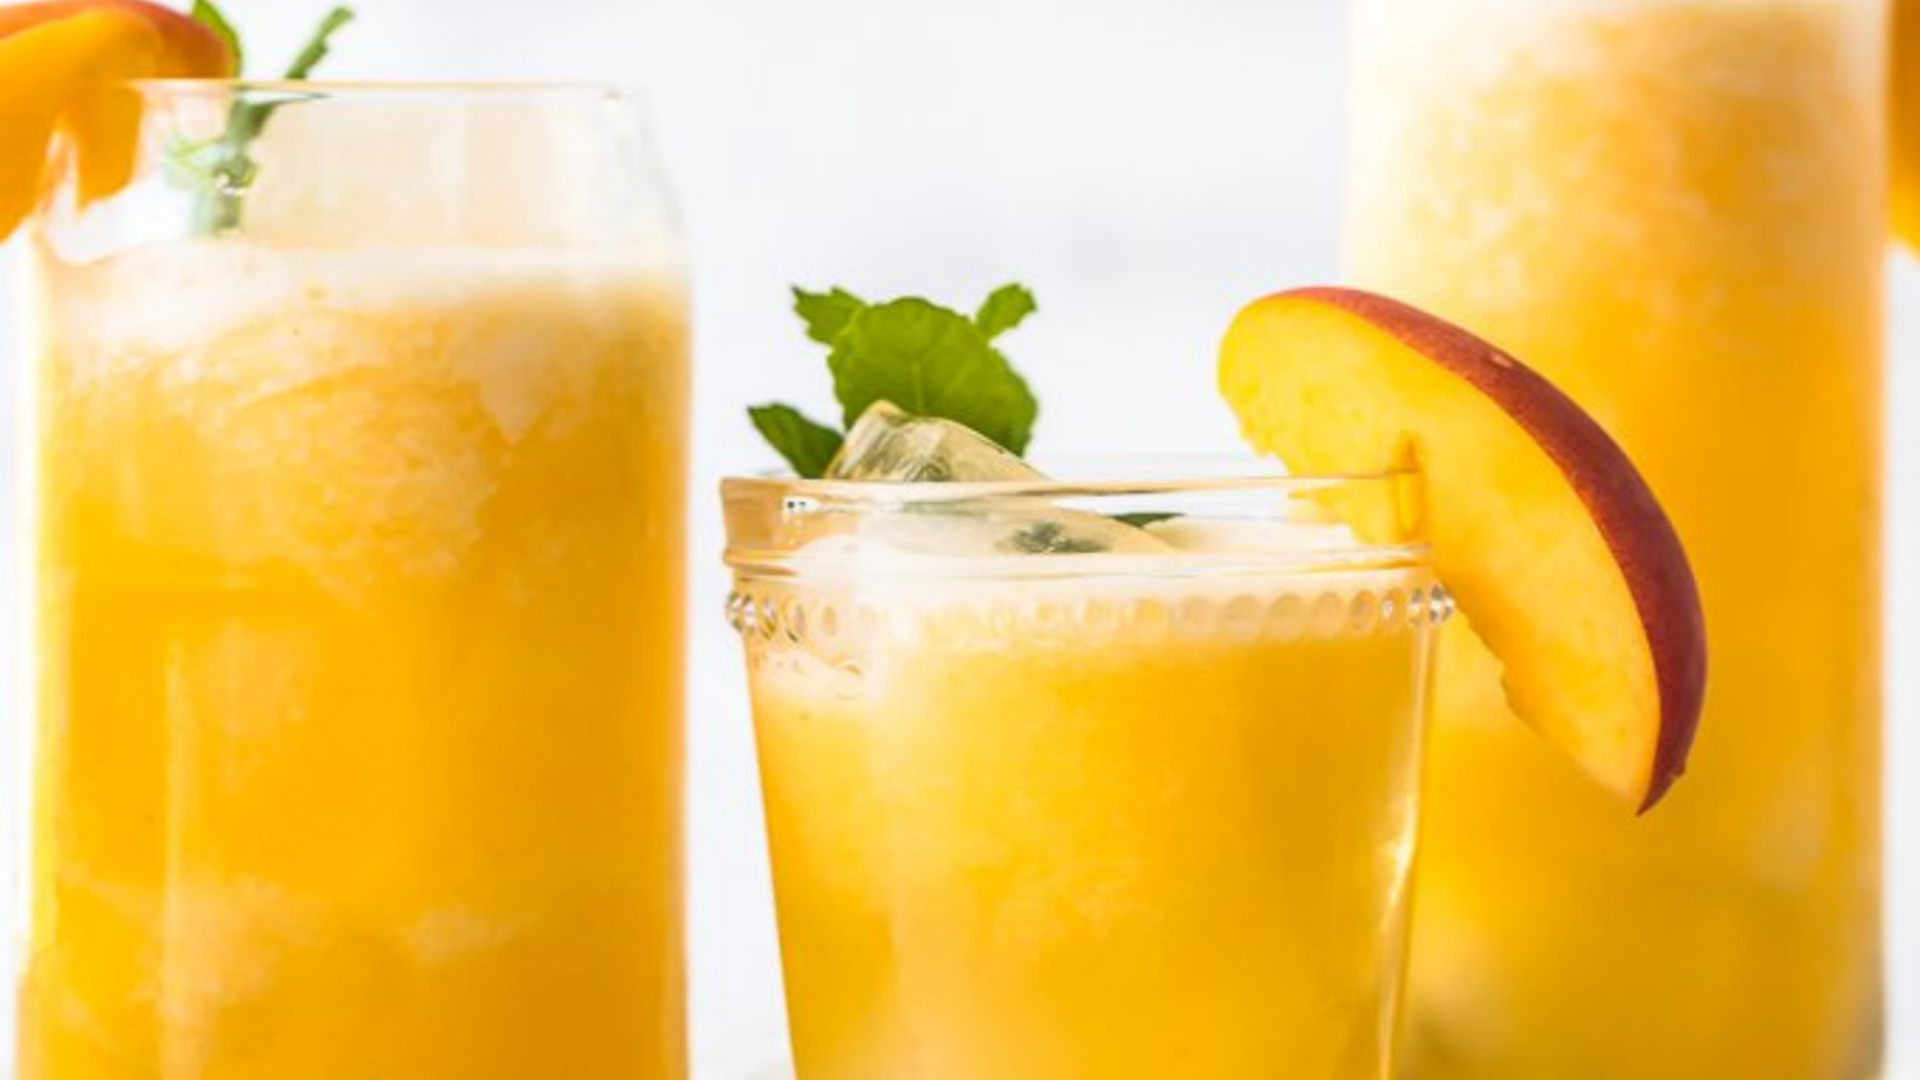 Debbie Arnold with Dining with Debbie shares a delicious recipe for frosty peach lemonade.